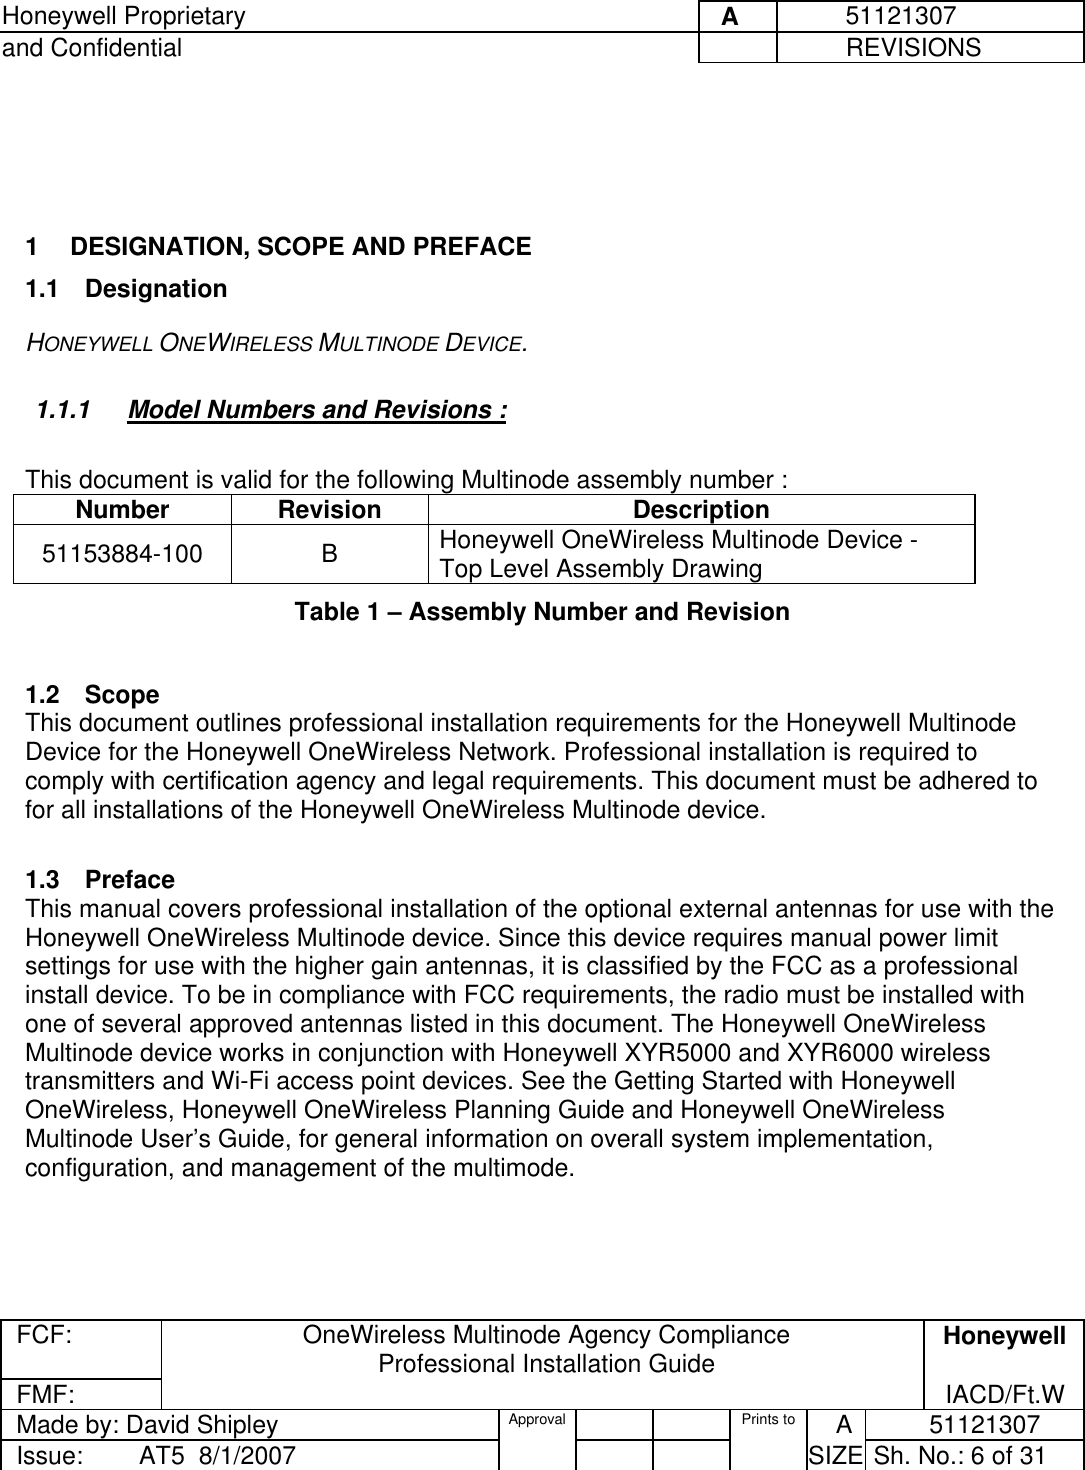 Honeywell Proprietary     A          51121307 and Confidential             REVISIONS  FCF:  OneWireless Multinode Agency Compliance Professional Installation Guide  Honeywell FMF:               IACD/Ft.W Made by: David Shipley  Approval   Prints to     A           51121307 Issue:        AT5  8/1/2007          SIZE  Sh. No.: 6 of 31      1  DESIGNATION, SCOPE AND PREFACE 1.1 Designation HONEYWELL ONEWIRELESS MULTINODE DEVICE.  1.1.1  Model Numbers and Revisions :   This document is valid for the following Multinode assembly number :  Number Revision  Description 51153884-100 B Honeywell OneWireless Multinode Device - Top Level Assembly Drawing Table 1 – Assembly Number and Revision   1.2 Scope This document outlines professional installation requirements for the Honeywell Multinode Device for the Honeywell OneWireless Network. Professional installation is required to comply with certification agency and legal requirements. This document must be adhered to for all installations of the Honeywell OneWireless Multinode device.   1.3 Preface This manual covers professional installation of the optional external antennas for use with the Honeywell OneWireless Multinode device. Since this device requires manual power limit settings for use with the higher gain antennas, it is classified by the FCC as a professional install device. To be in compliance with FCC requirements, the radio must be installed with one of several approved antennas listed in this document. The Honeywell OneWireless Multinode device works in conjunction with Honeywell XYR5000 and XYR6000 wireless transmitters and Wi-Fi access point devices. See the Getting Started with Honeywell OneWireless, Honeywell OneWireless Planning Guide and Honeywell OneWireless Multinode User’s Guide, for general information on overall system implementation, configuration, and management of the multimode.  